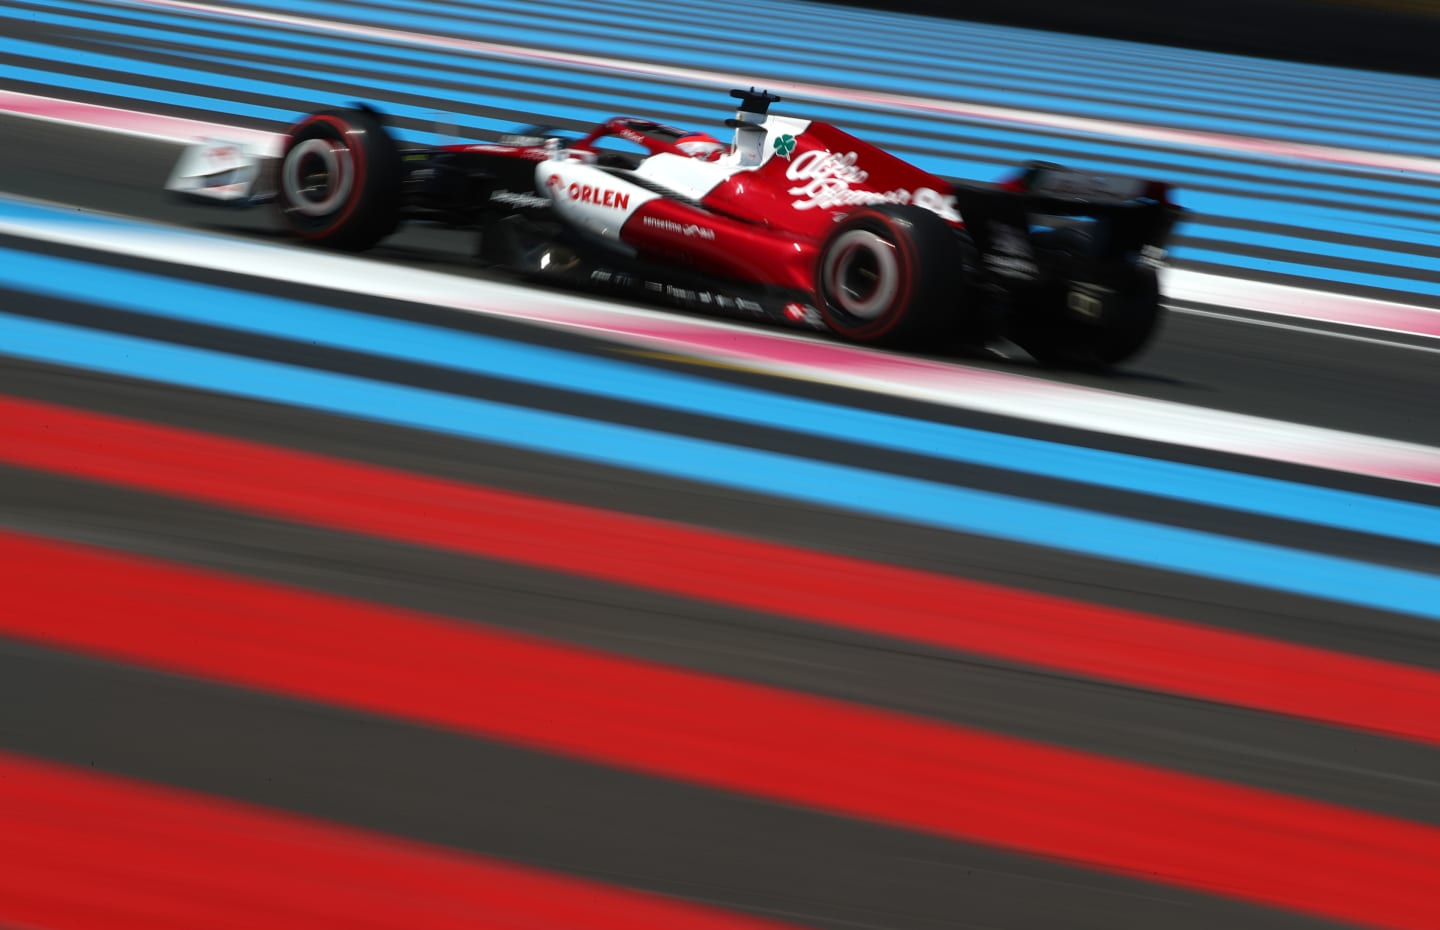 LE CASTELLET, FRANCE - JULY 22: Robert Kubica of Poland driving the (88) Alfa Romeo F1 C42 Ferrari on track during practice ahead of the F1 Grand Prix of France at Circuit Paul Ricard on July 22, 2022 in Le Castellet, France. (Photo by Joe Portlock - Formula 1/Formula 1 via Getty Images)